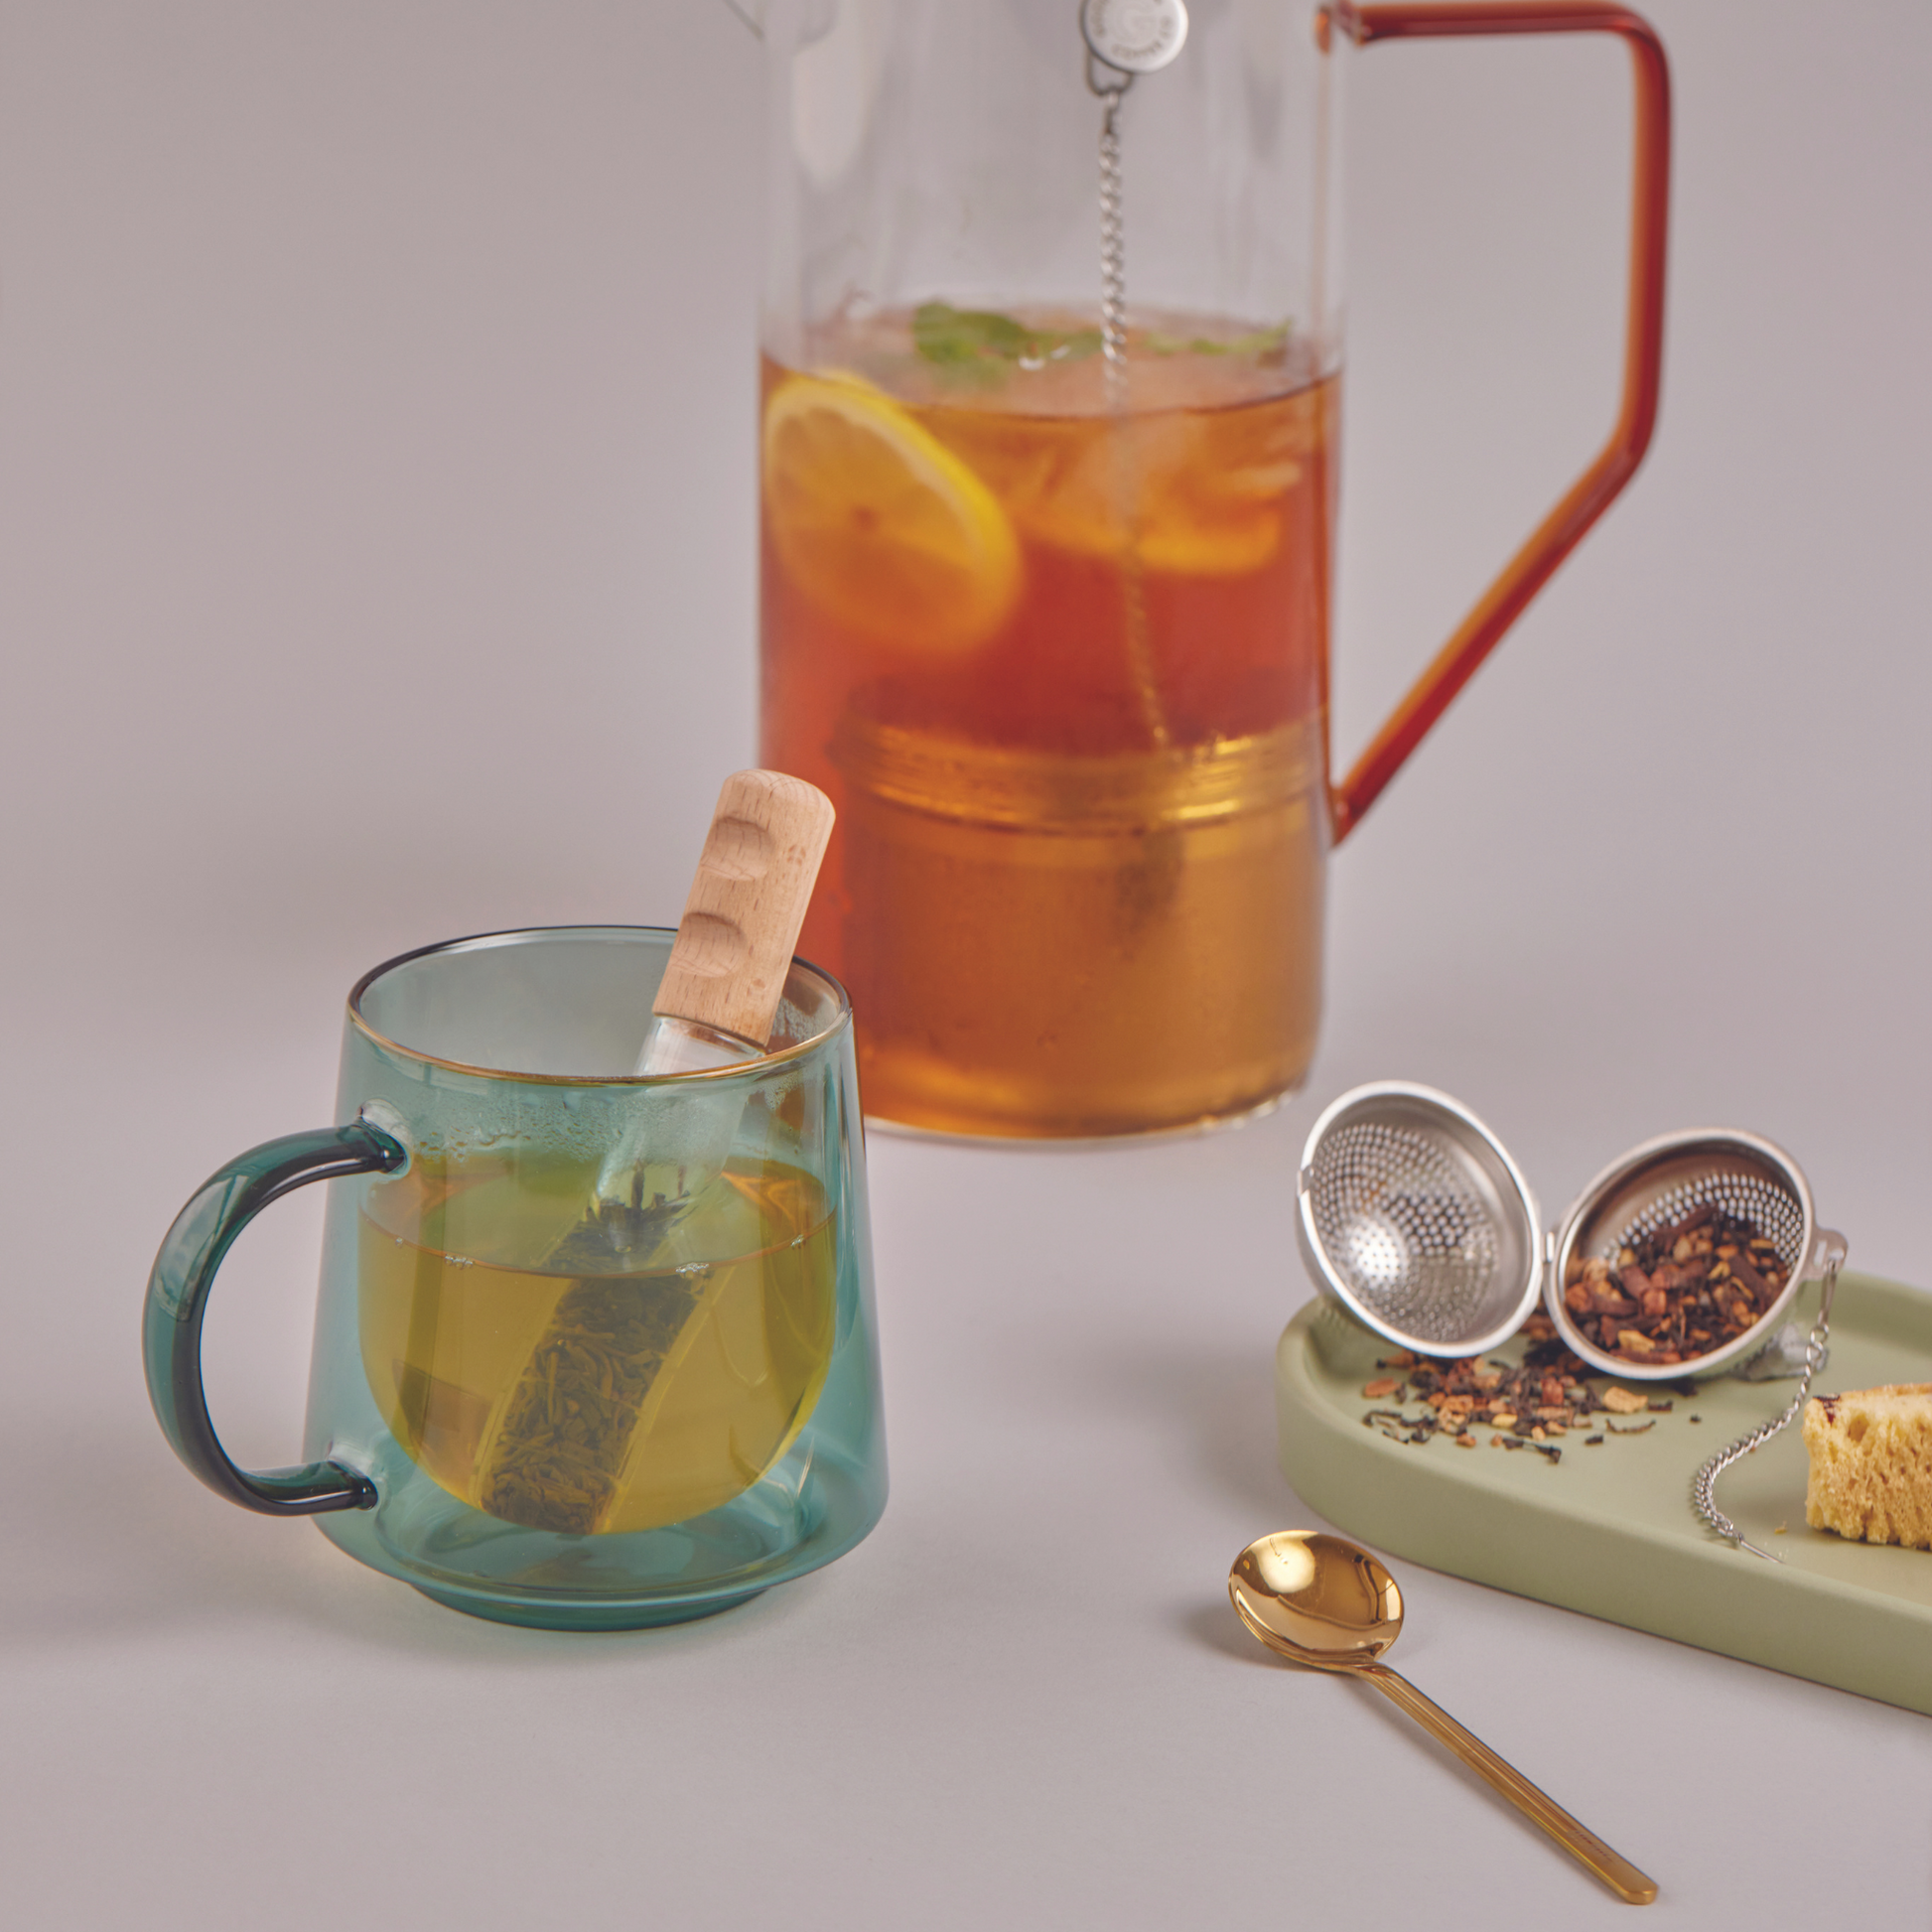 tea infuser next to a cup of tea